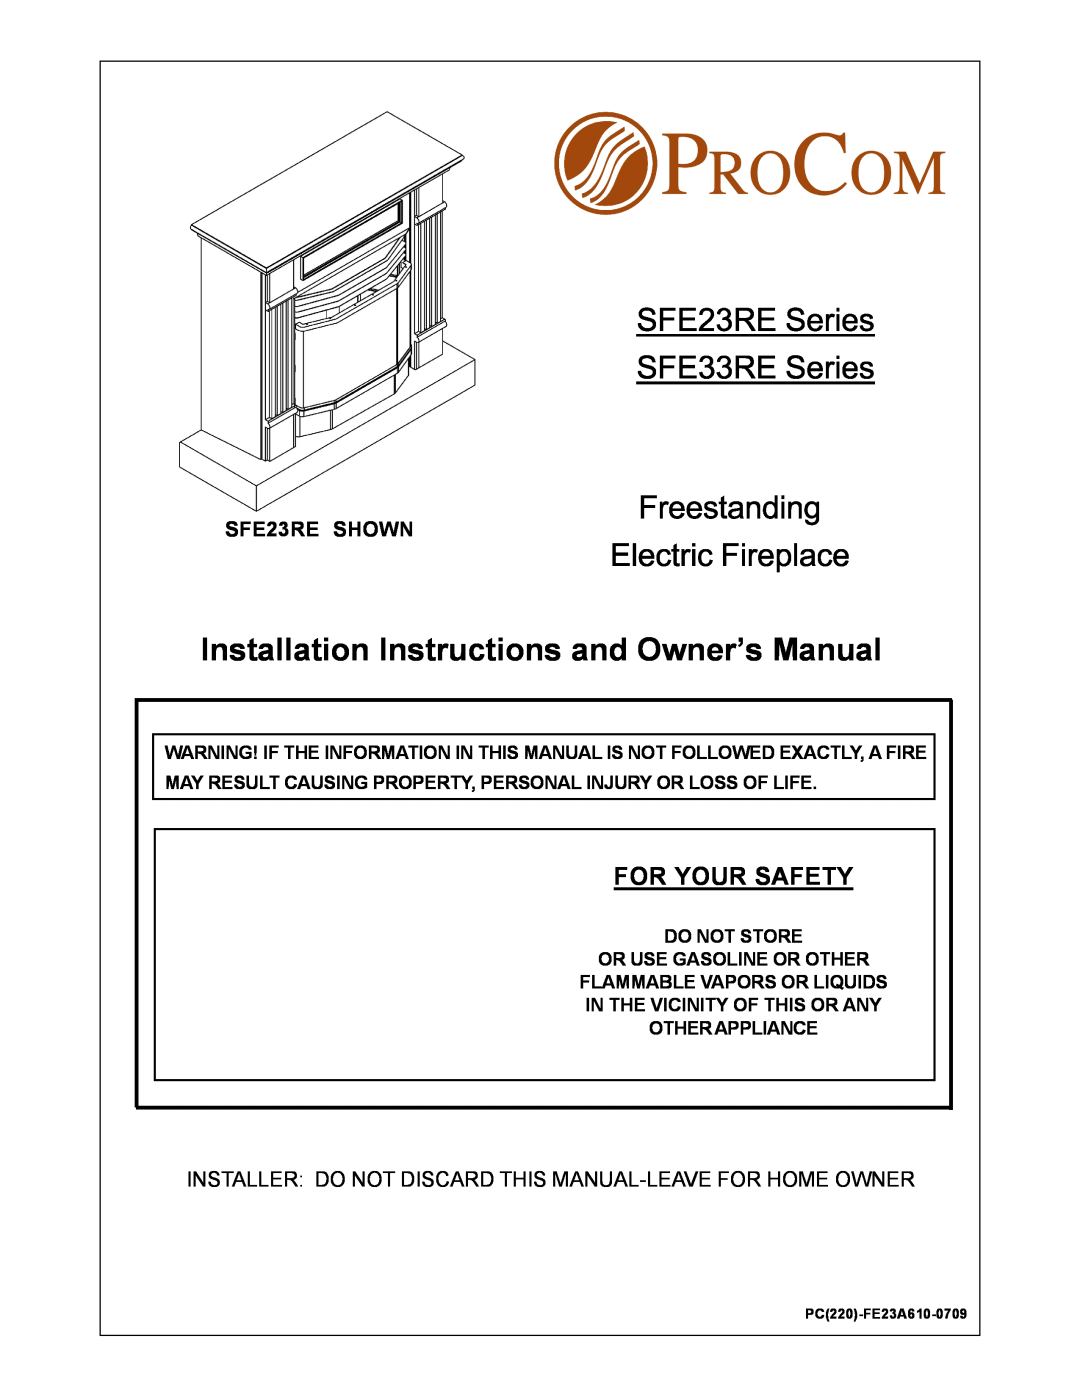 Procom SFE33RE installation instructions For Your Safety, Do Not Store Or Use Gasoline Or Other, PC220-FE23A610-0709 